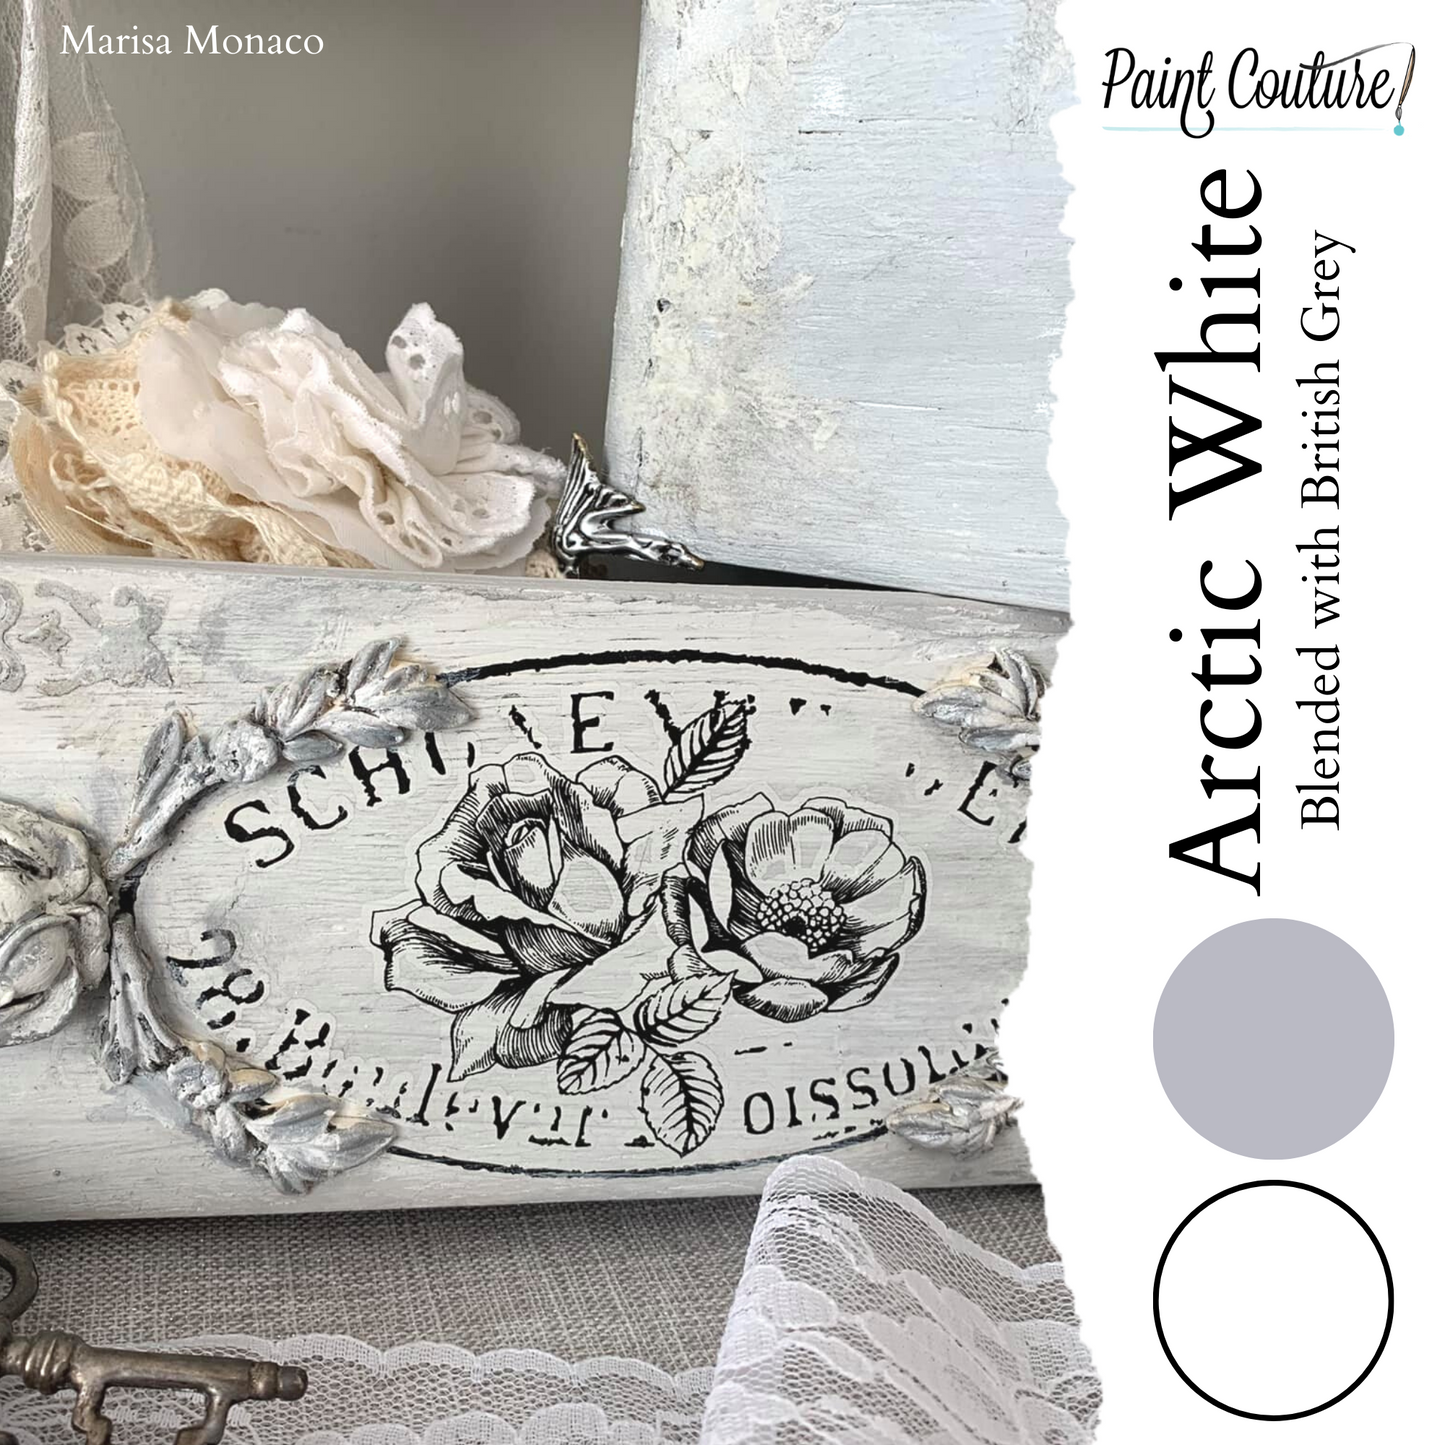 Paint Couture British Gray